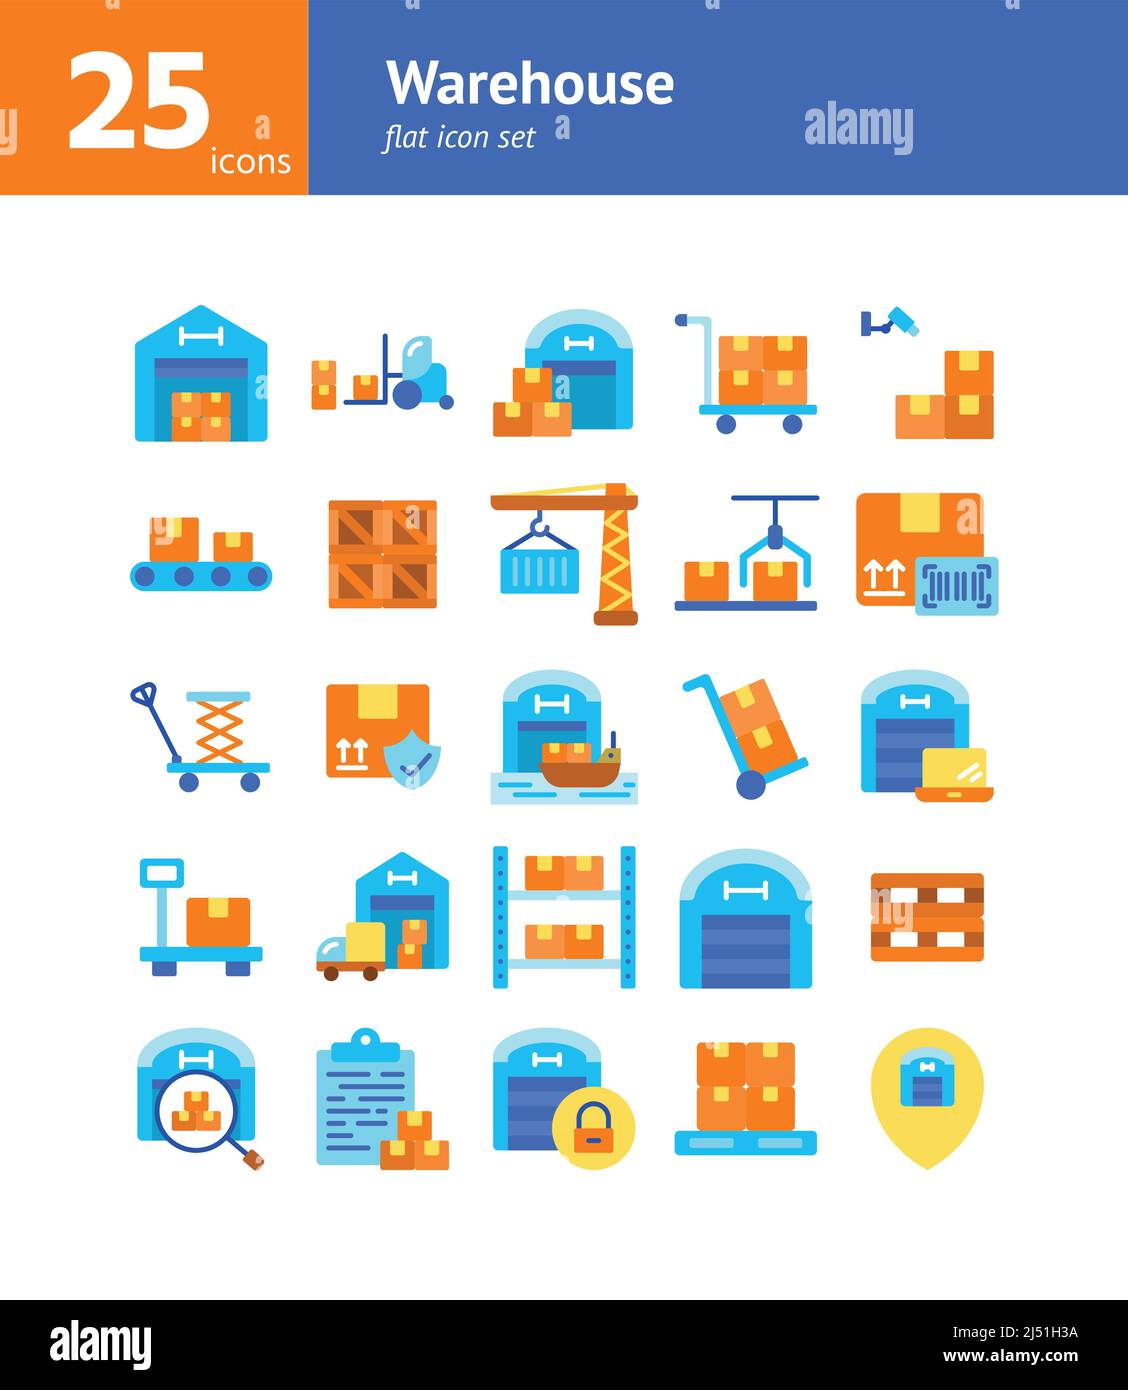 Warehouse flat icon set. Vector and Illustration. Stock Vector